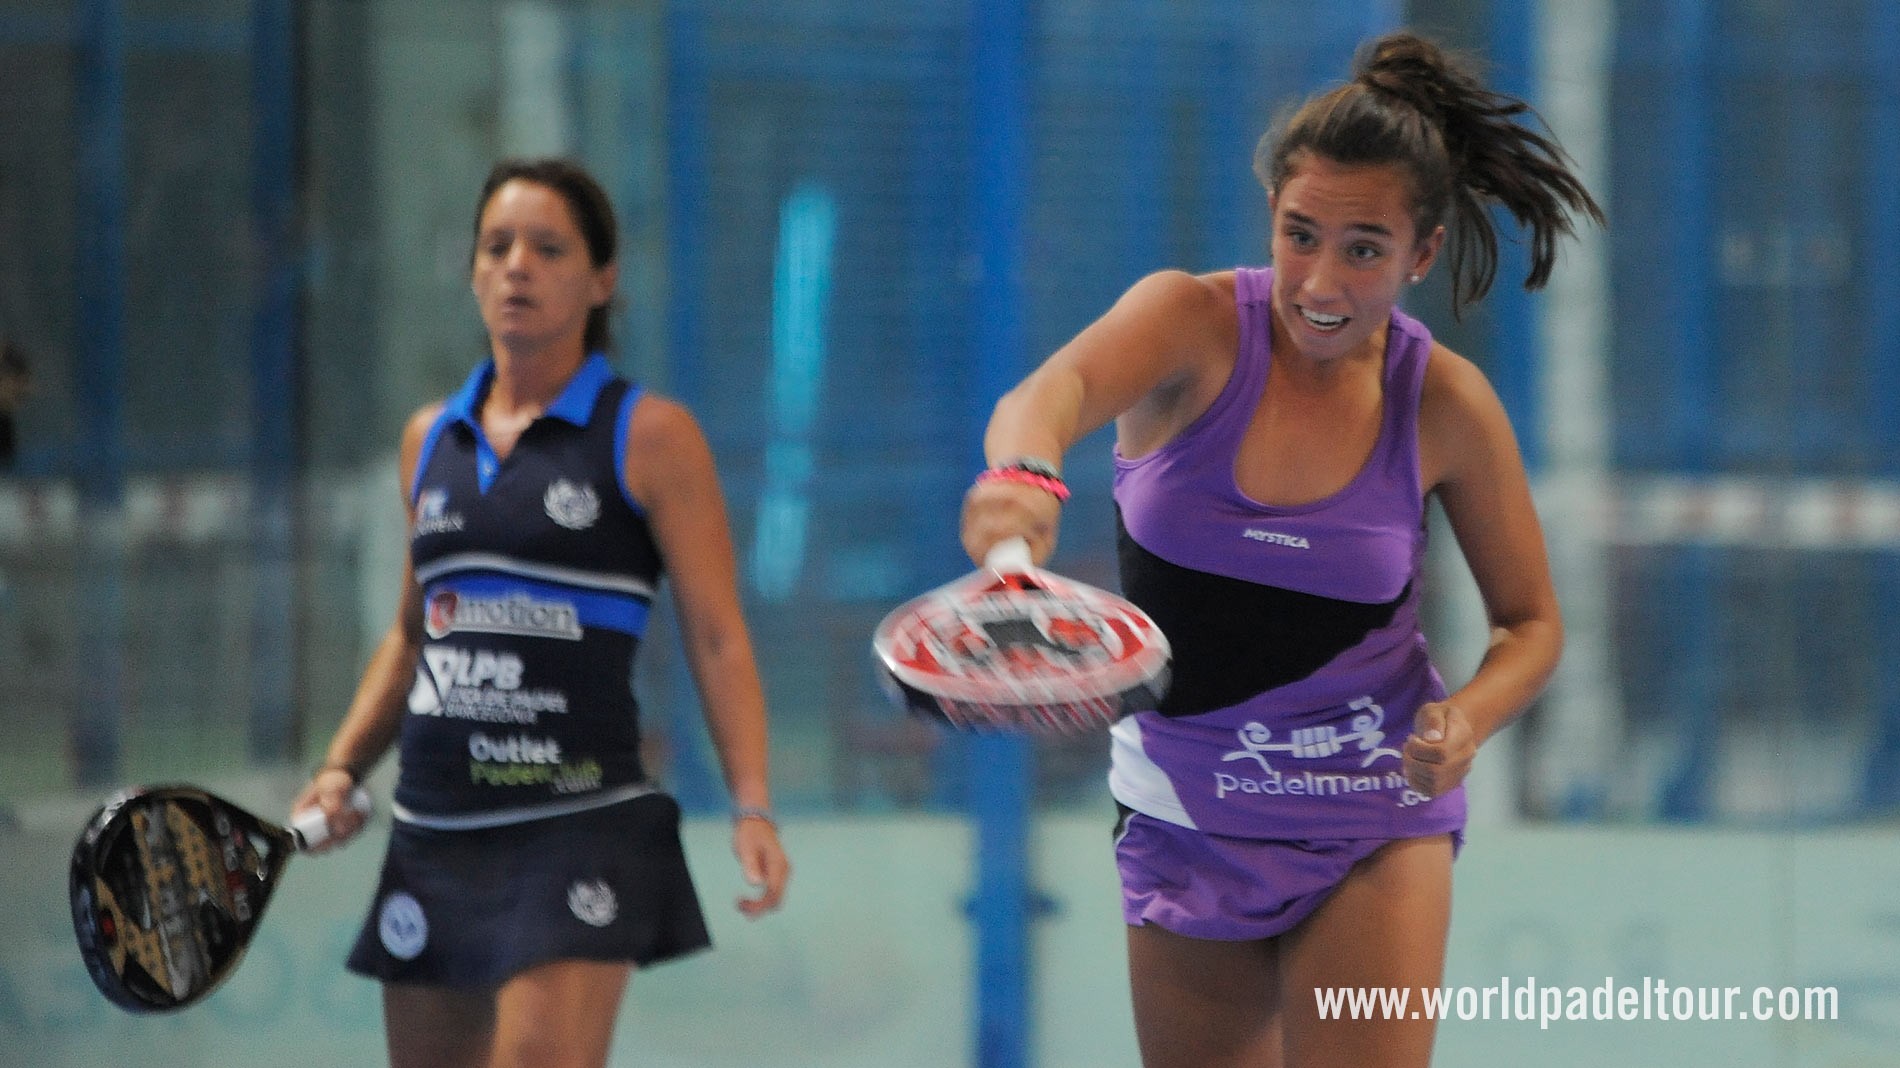 World Padel Tour records unlikely to ever be broken again